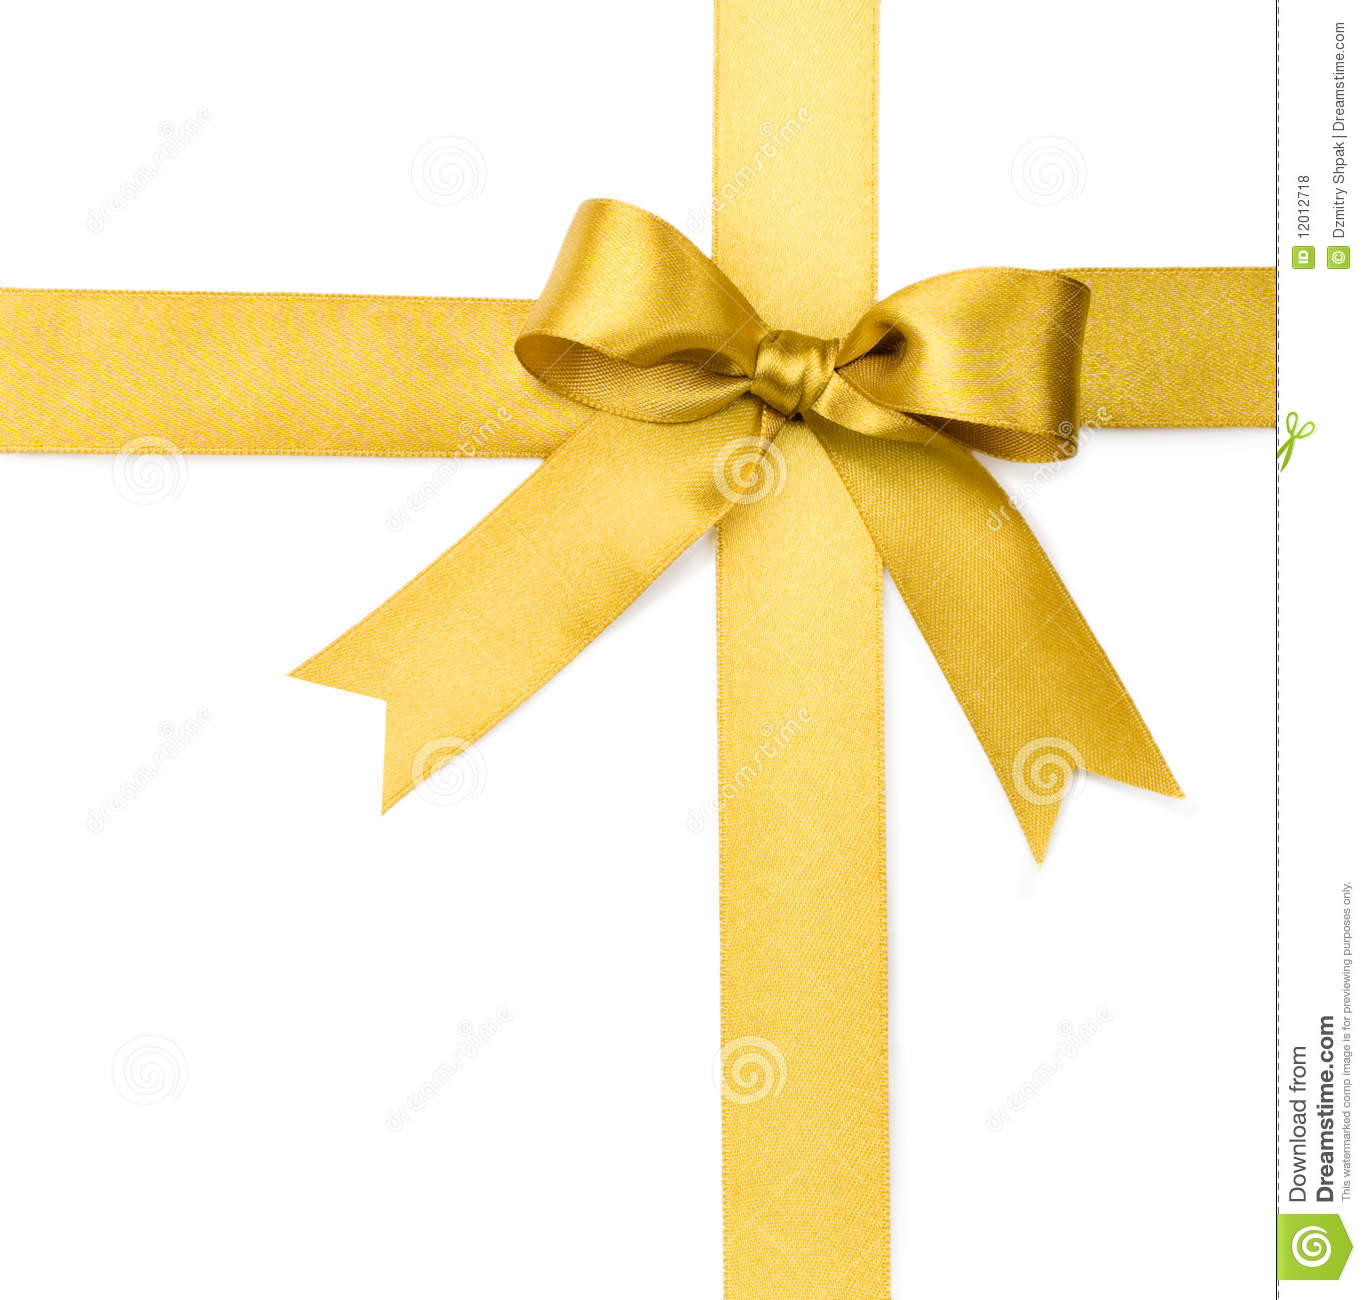 Beautiful Gold Bow On White Background Royalty Free Stock Photos    